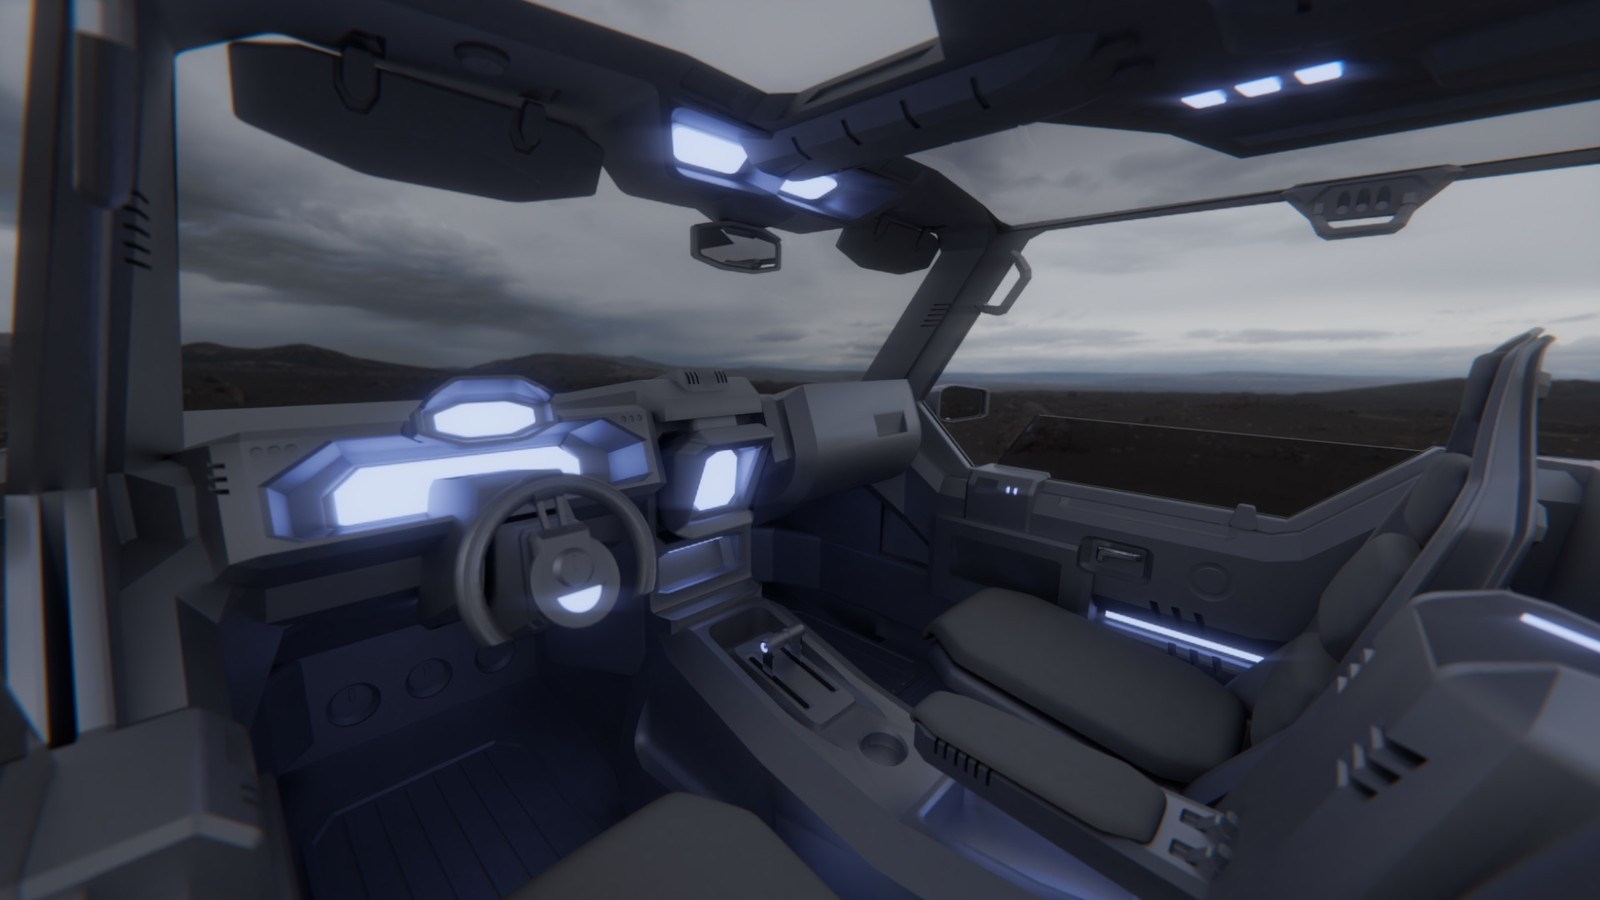 bit more shape to the elements of the vehicle interior